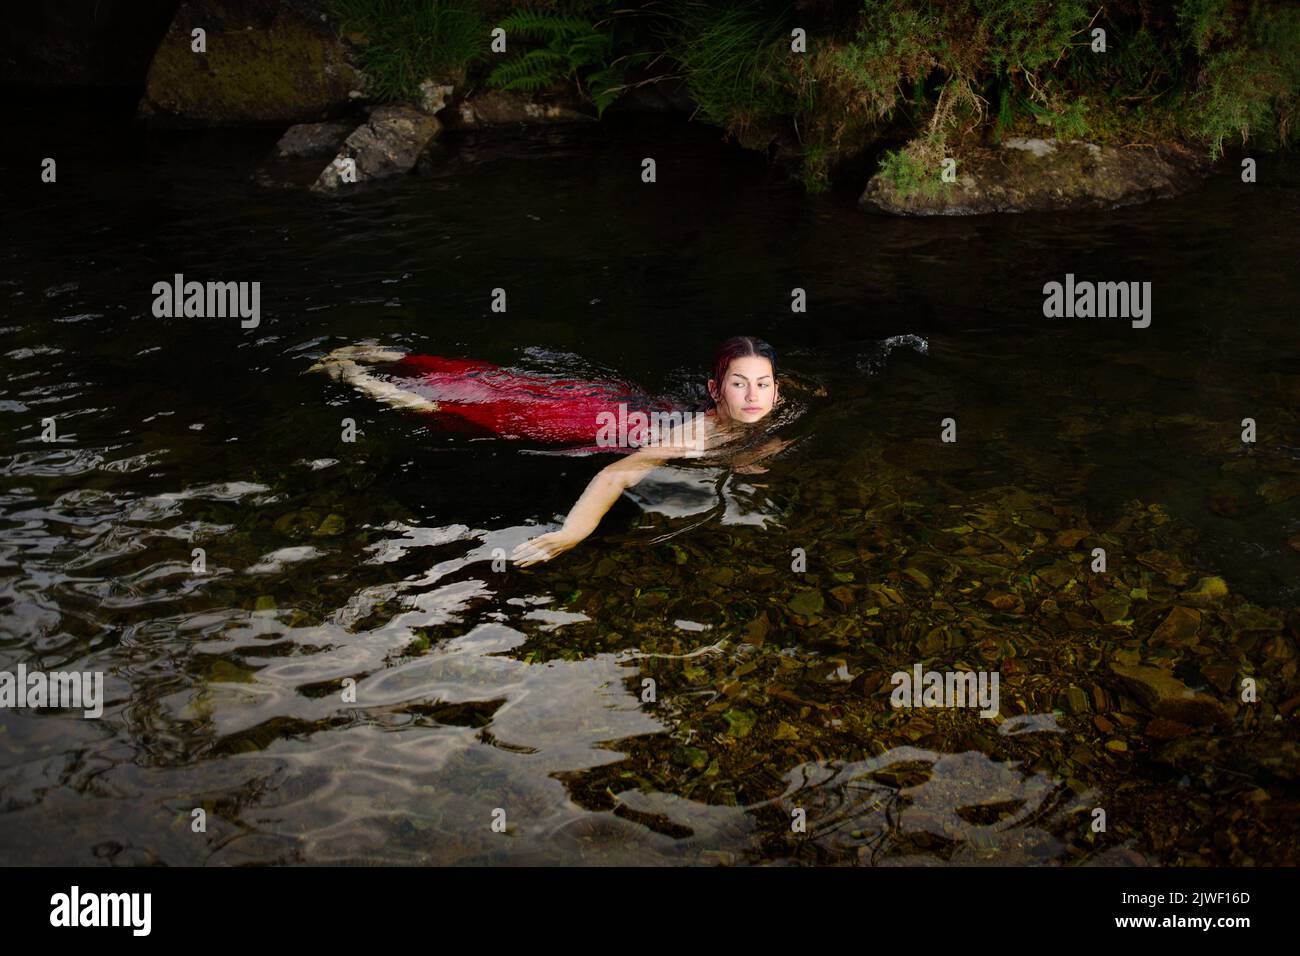 Woman cold water swimming in a river fully clothed in a red dress Stock Photo